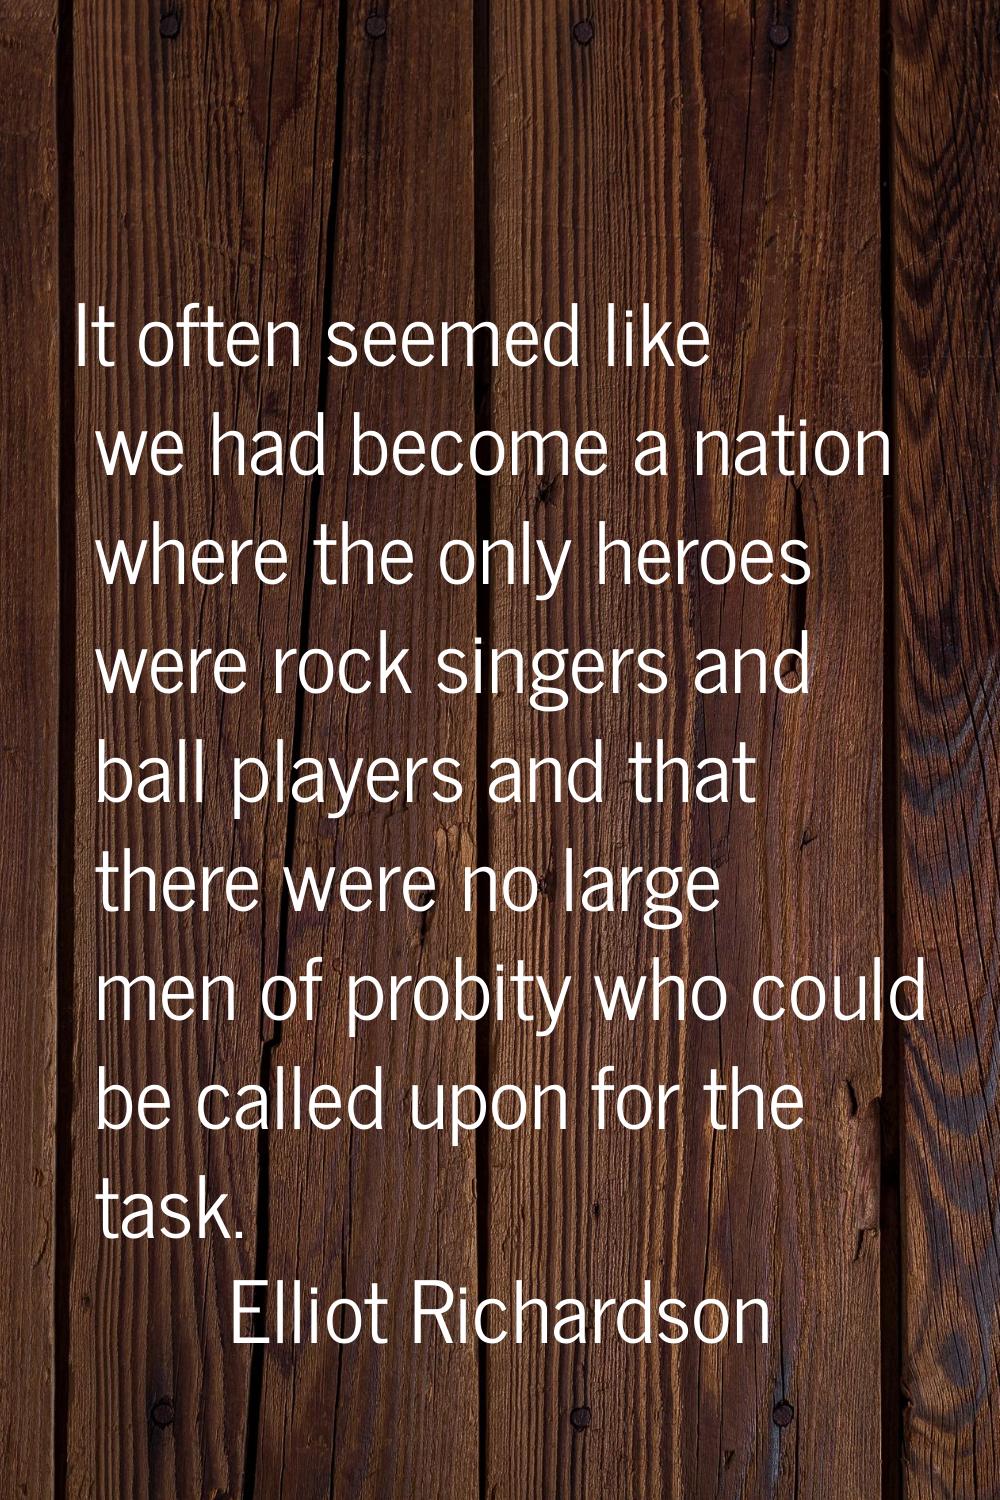 It often seemed like we had become a nation where the only heroes were rock singers and ball player